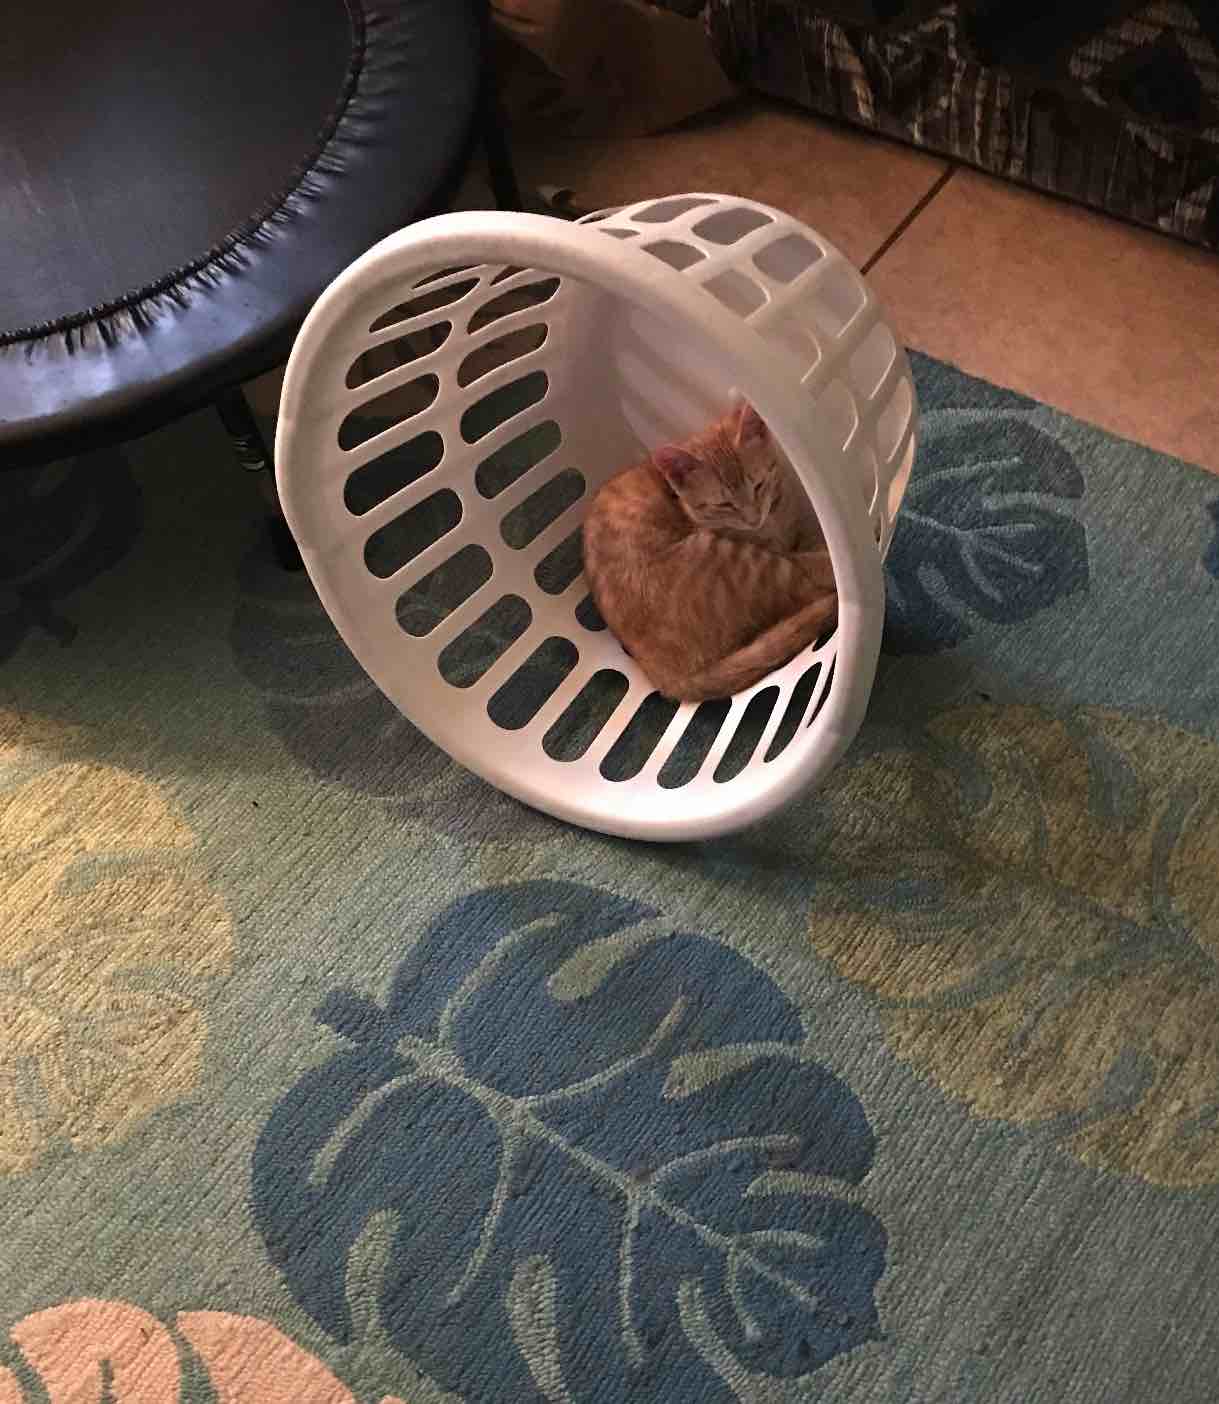 Kitty In a laundry basket